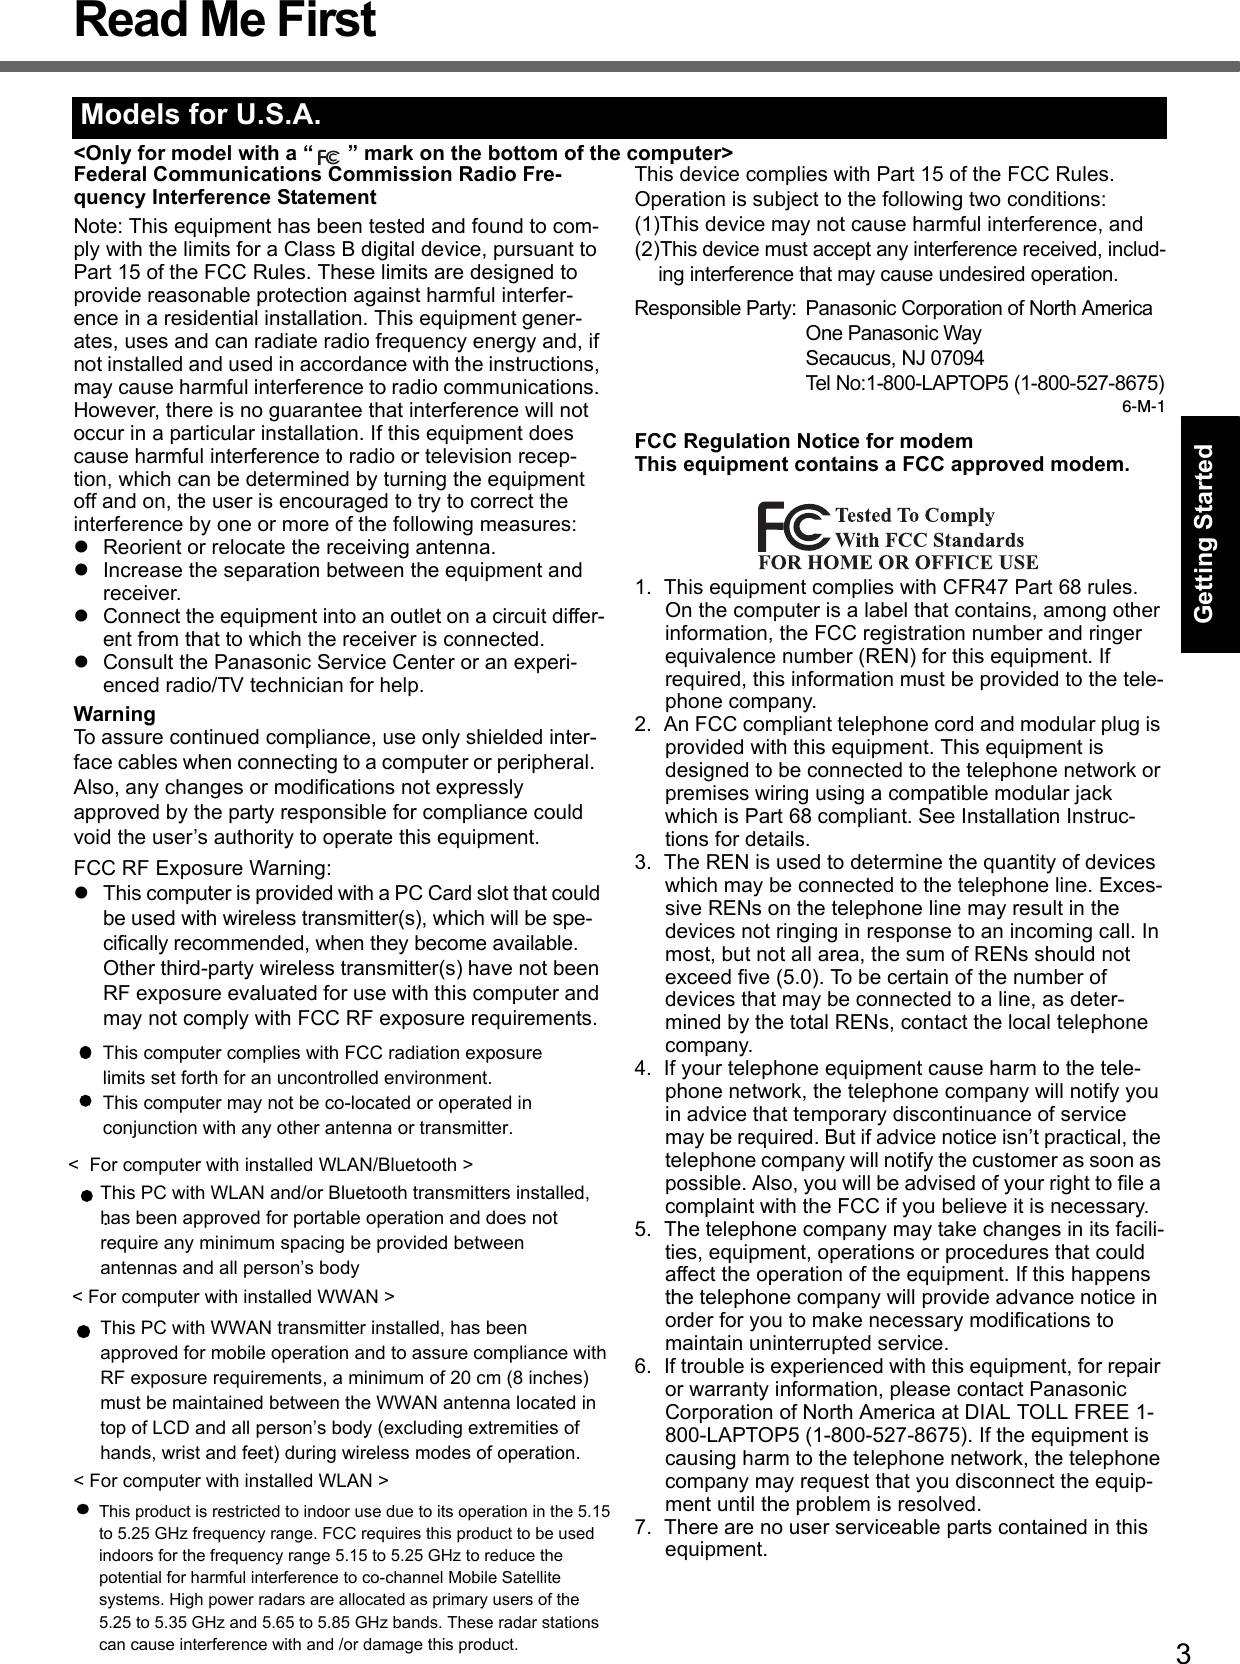 3Getting StartedUseful InformationTroubleshootingAppendixRead Me First&lt;Only for model with a “ ” mark on the bottom of the computer&gt;Federal Communications Commission Radio Fre-quency Interference StatementNote: This equipment has been tested and found to com-ply with the limits for a Class B digital device, pursuant to Part 15 of the FCC Rules. These limits are designed to provide reasonable protection against harmful interfer-ence in a residential installation. This equipment gener-ates, uses and can radiate radio frequency energy and, if not installed and used in accordance with the instructions, may cause harmful interference to radio communications. However, there is no guarantee that interference will not occur in a particular installation. If this equipment does cause harmful interference to radio or television recep-tion, which can be determined by turning the equipment off and on, the user is encouraged to try to correct the interference by one or more of the following measures:Reorient or relocate the receiving antenna.Increase the separation between the equipment and receiver.Connect the equipment into an outlet on a circuit differ-ent from that to which the receiver is connected.Consult the Panasonic Service Center or an experi-enced radio/TV technician for help.WarningTo assure continued compliance, use only shielded inter-face cables when connecting to a computer or peripheral.  Also, any changes or modifications not expressly approved by the party responsible for compliance could void the user’s authority to operate this equipment.FCC RF Exposure Warning:This computer is provided with a PC Card slot that could be used with wireless transmitter(s), which will be spe-cifically recommended, when they become available.Other third-party wireless transmitter(s) have not been RF exposure evaluated for use with this computer and may not comply with FCC RF exposure requirements. . This device complies with Part 15 of the FCC Rules.  Operation is subject to the following two conditions:(1)This device may not cause harmful interference, and(2)This device must accept any interference received, includ-ing interference that may cause undesired operation.Responsible Party: Panasonic Corporation of North AmericaOne Panasonic WaySecaucus, NJ 07094Tel No:1-800-LAPTOP5 (1-800-527-8675)6-M-1FCC Regulation Notice for modemThis equipment contains a FCC approved modem.1. This equipment complies with CFR47 Part 68 rules. On the computer is a label that contains, among other information, the FCC registration number and ringer equivalence number (REN) for this equipment. If required, this information must be provided to the tele-phone company.2. An FCC compliant telephone cord and modular plug is provided with this equipment. This equipment is designed to be connected to the telephone network or premises wiring using a compatible modular jack which is Part 68 compliant. See Installation Instruc-tions for details.3. The REN is used to determine the quantity of devices which may be connected to the telephone line. Exces-sive RENs on the telephone line may result in the devices not ringing in response to an incoming call. In most, but not all area, the sum of RENs should not exceed five (5.0). To be certain of the number of devices that may be connected to a line, as deter-mined by the total RENs, contact the local telephone company.4. If your telephone equipment cause harm to the tele-phone network, the telephone company will notify you in advice that temporary discontinuance of service may be required. But if advice notice isn’t practical, the telephone company will notify the customer as soon as possible. Also, you will be advised of your right to file a complaint with the FCC if you believe it is necessary.5. The telephone company may take changes in its facili-ties, equipment, operations or procedures that could affect the operation of the equipment. If this happens the telephone company will provide advance notice in order for you to make necessary modifications to maintain uninterrupted service.6. If trouble is experienced with this equipment, for repair or warranty information, please contact Panasonic Corporation of North America at DIAL TOLL FREE 1-800-LAPTOP5 (1-800-527-8675). If the equipment is causing harm to the telephone network, the telephone company may request that you disconnect the equip-ment until the problem is resolved.7. There are no user serviceable parts contained in this equipment.Models for U.S.A.This computer complies with FCC radiation exposurelimits set forth for an uncontrolled environment.This computer may not be co-located or operated inconjunction with any other antenna or transmitter.&lt;  For computer with installed WLAN/Bluetooth &gt;This PC with WLAN and/or Bluetooth transmitters installed, has been approved for portable operation and does not require any minimum spacing be provided between antennas and all person’s body&lt; For computer with installed WWAN &gt;This PC with WWAN transmitter installed, has been approved for mobile operation and to assure compliance with RF exposure requirements, a minimum of 20 cm (8 inches) must be maintained between the WWAN antenna located in top of LCD and all person’s body (excluding extremities of hands, wrist and feet) during wireless modes of operation.&lt; For computer with installed WLAN &gt;This product is restricted to indoor use due to its operation in the 5.15 to 5.25 GHz frequency range. FCC requires this product to be used indoors for the frequency range 5.15 to 5.25 GHz to reduce the potential for harmful interference to co-channel Mobile Satellite systems. High power radars are allocated as primary users of the 5.25 to 5.35 GHz and 5.65 to 5.85 GHz bands. These radar stations can cause interference with and /or damage this product.